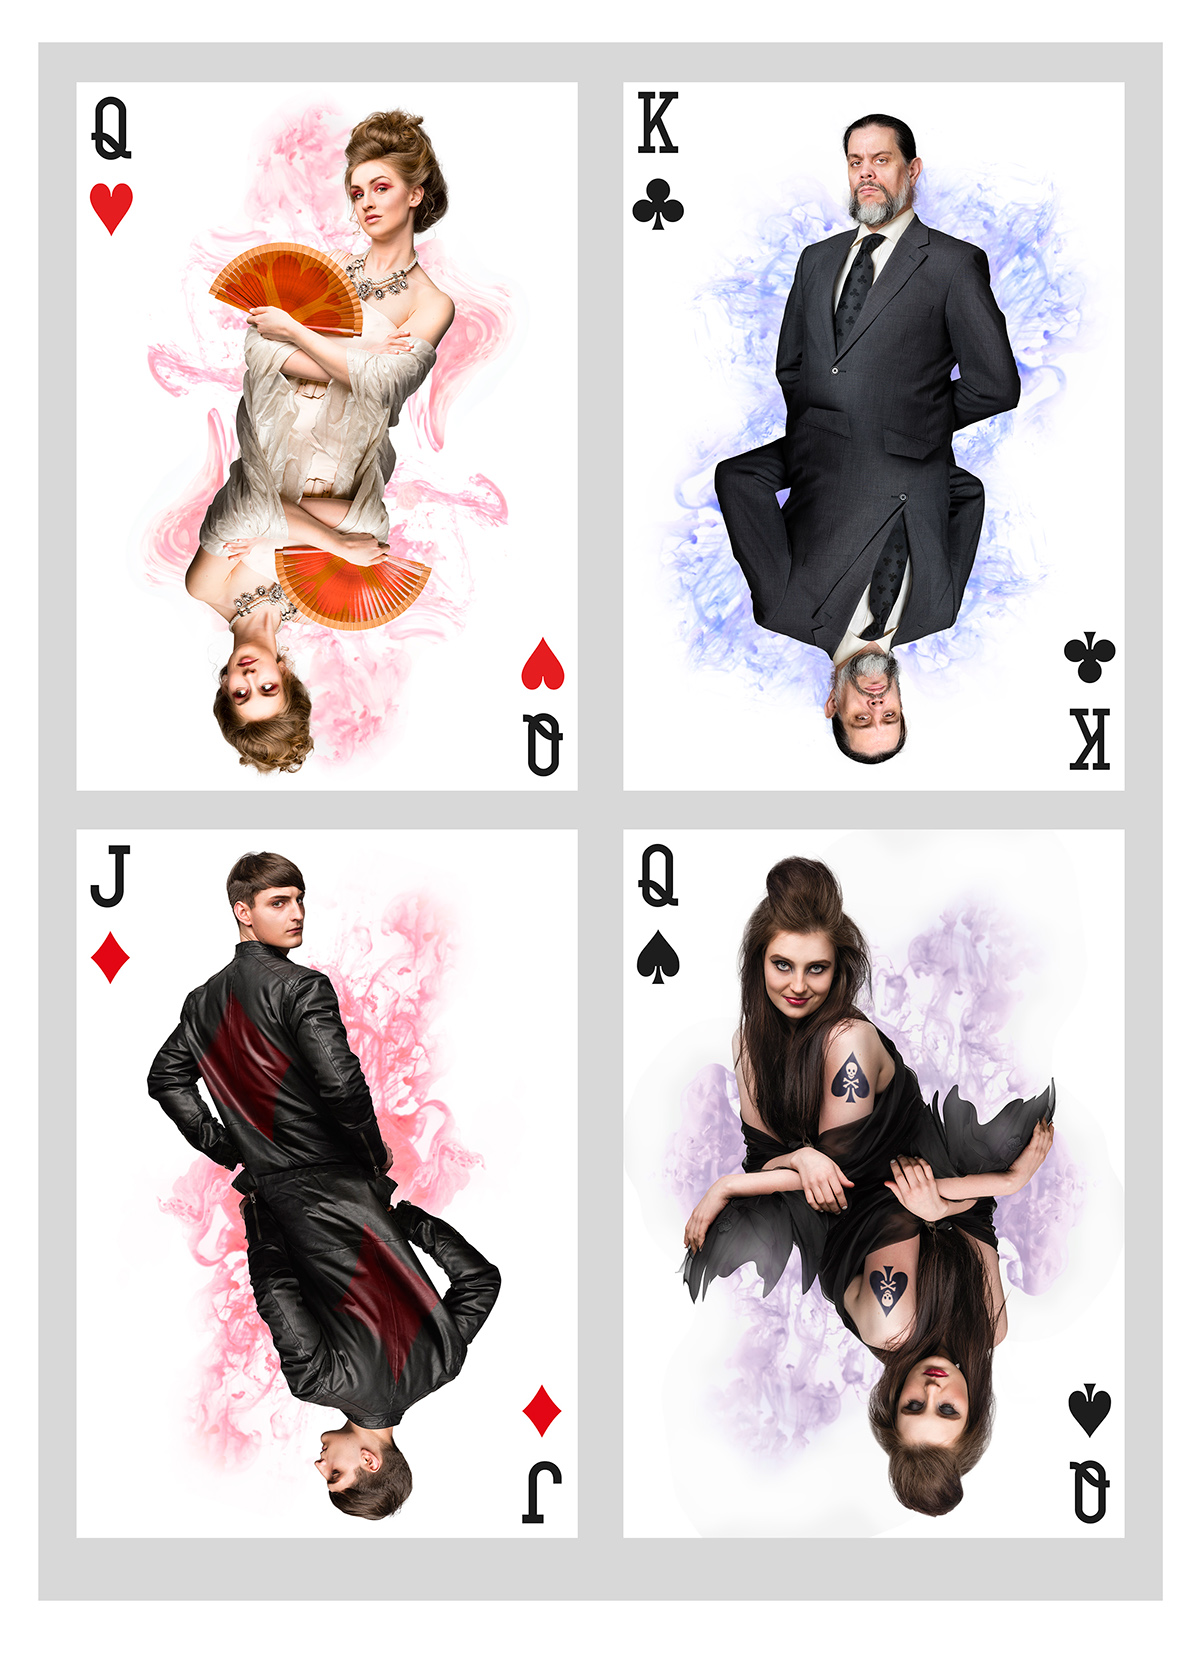 Playing Cards royalty characters portrait Portraiture digital Editing 